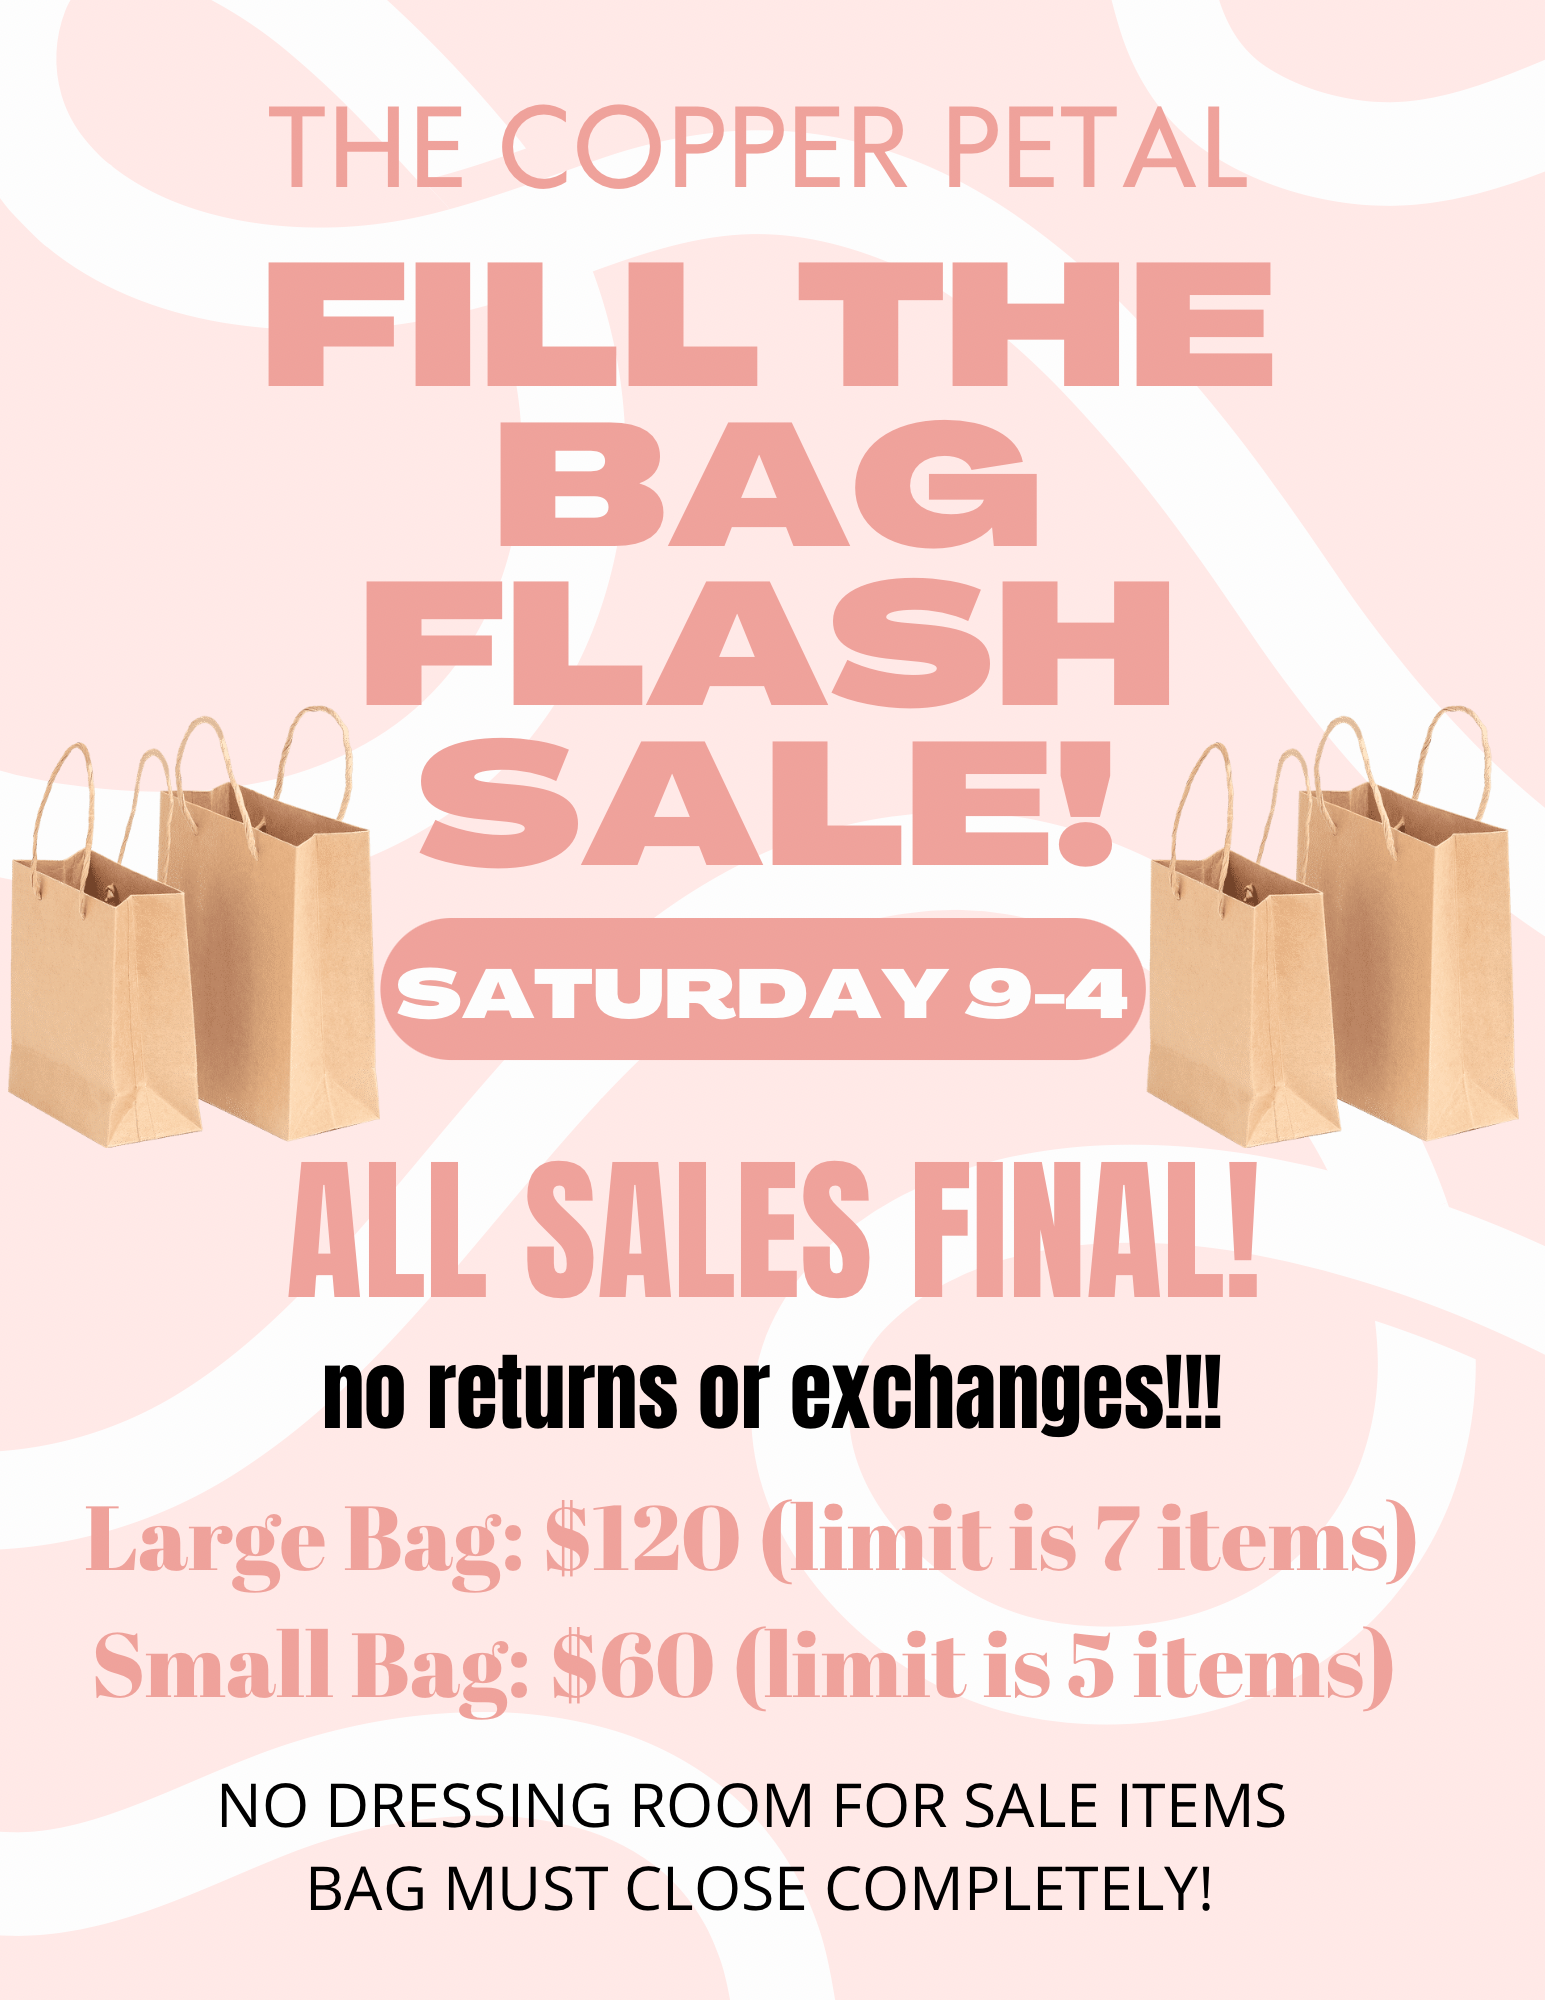 Fill the bag $5 ADD ON ITEM – The Copper Petal